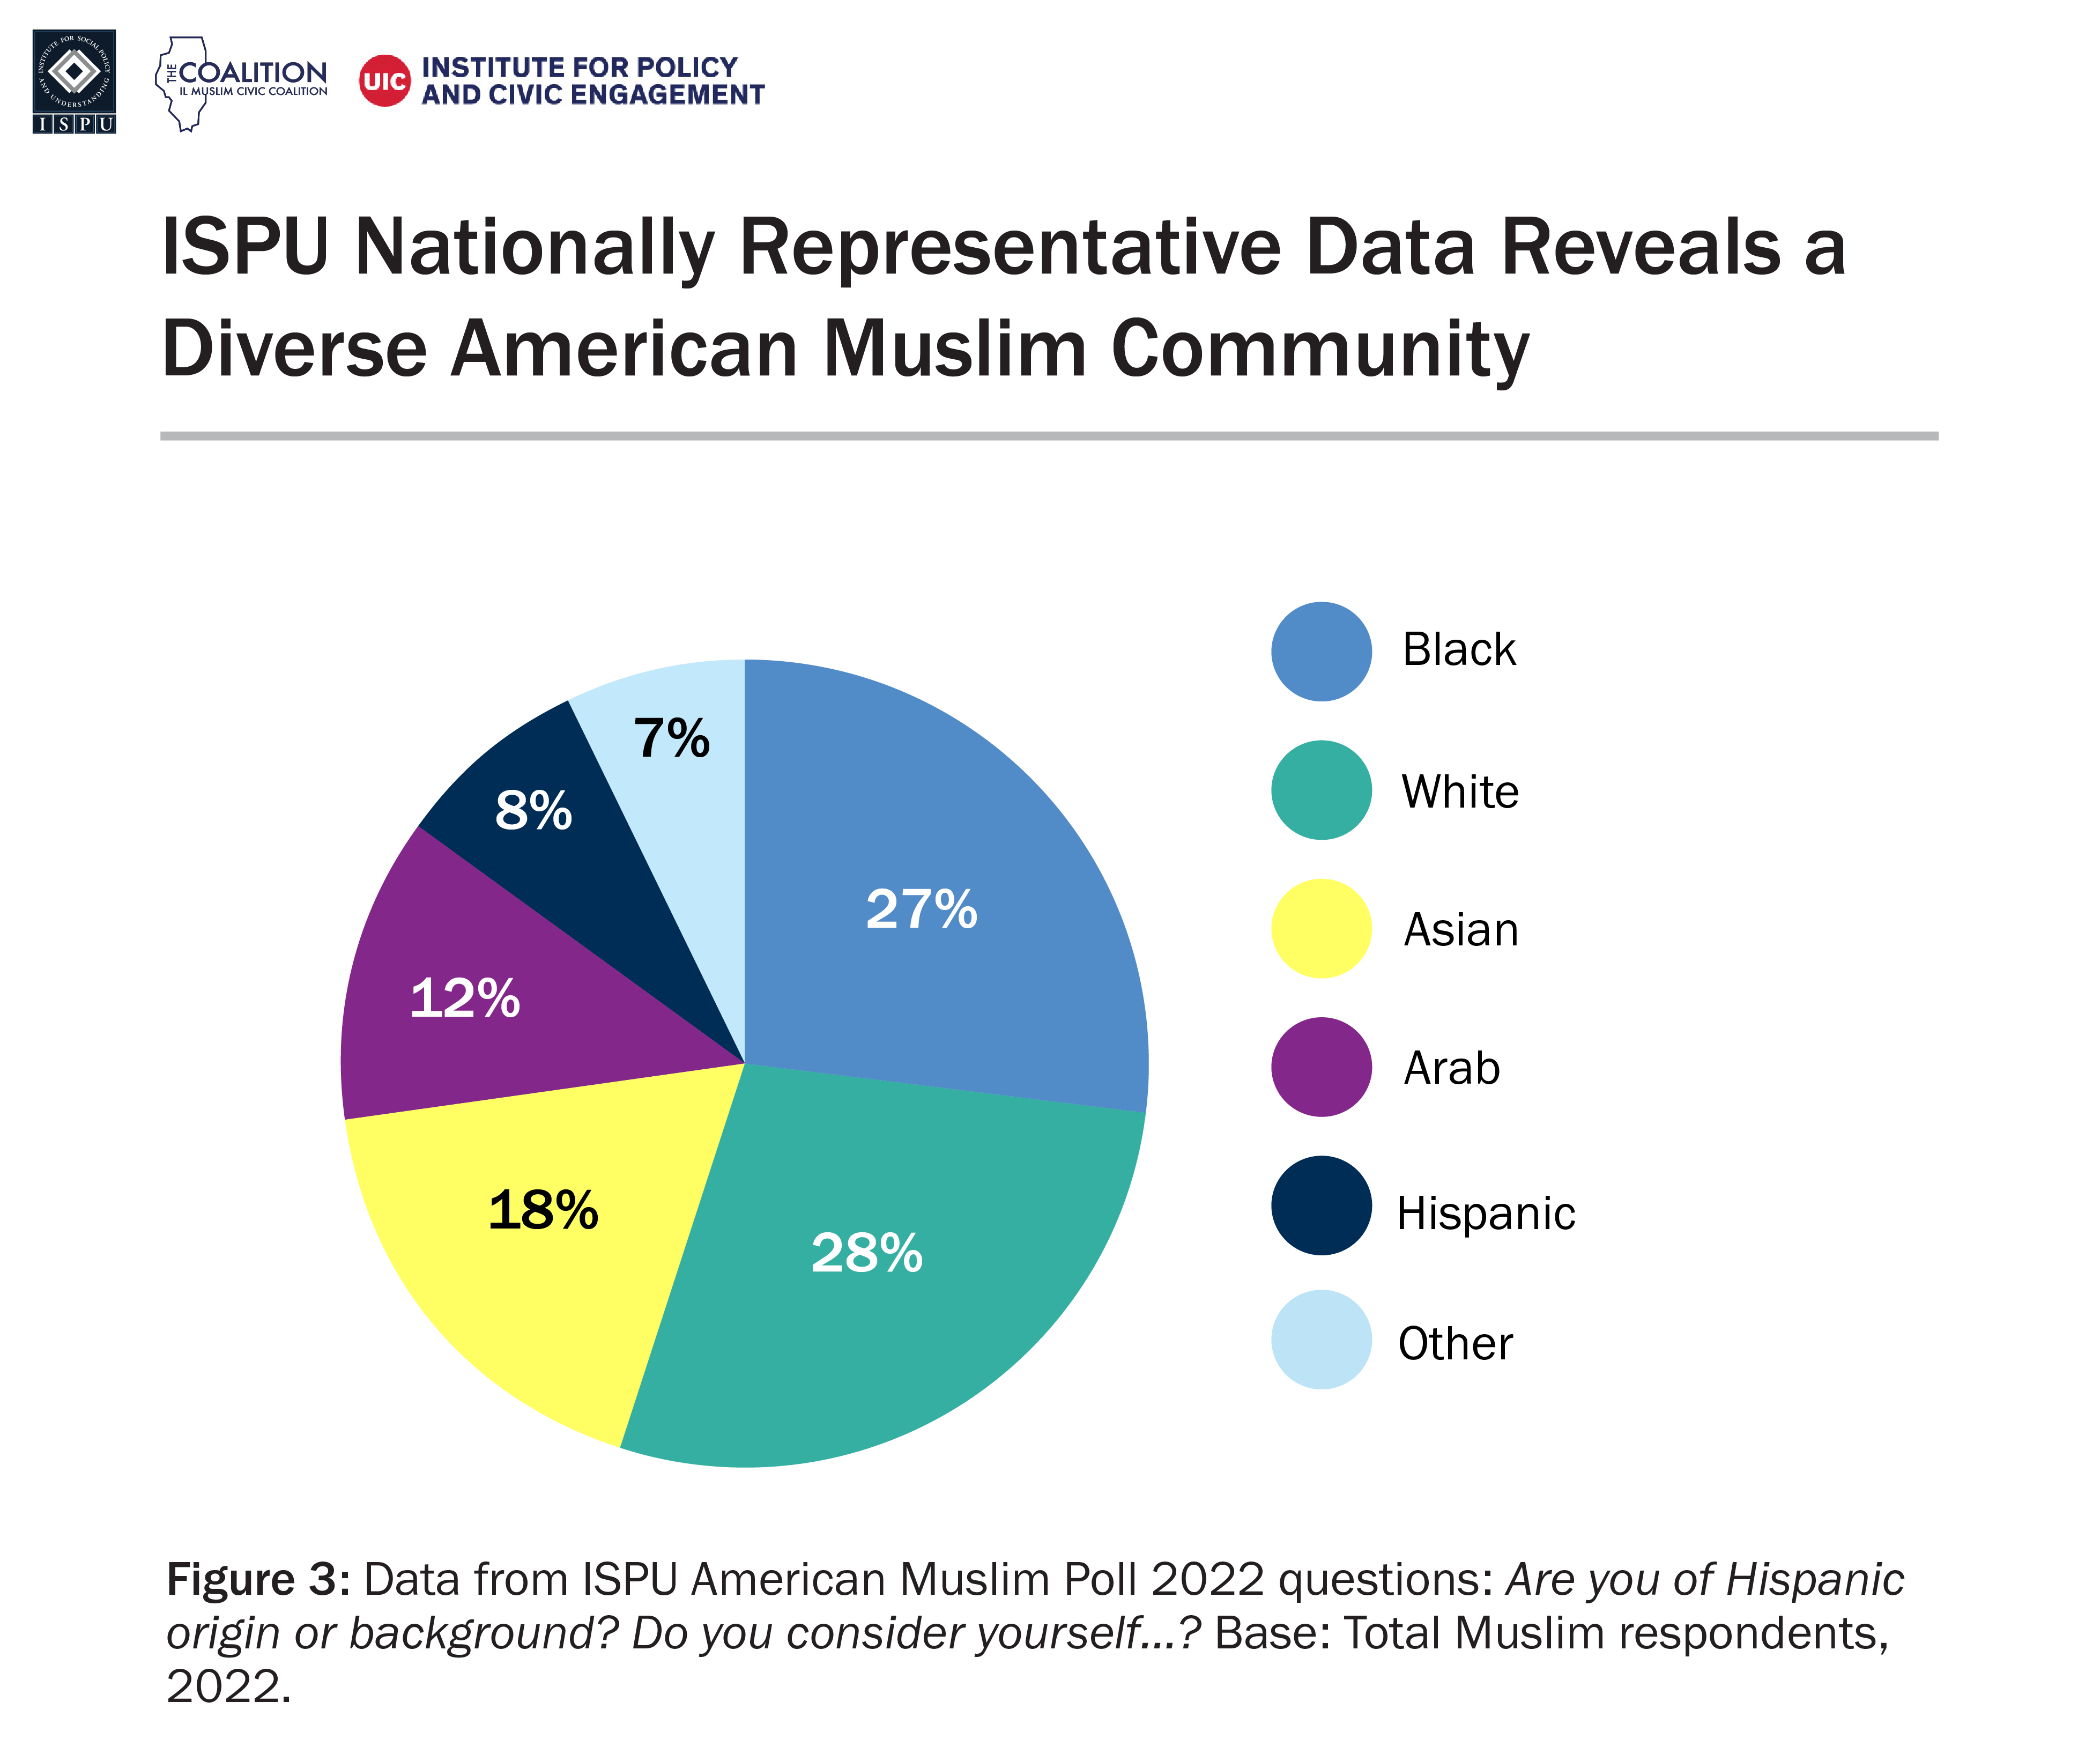 A pie chart showing the racial/ethnic diversity of the national American Muslim community based on ISPU’s nationally representative American Muslim Poll